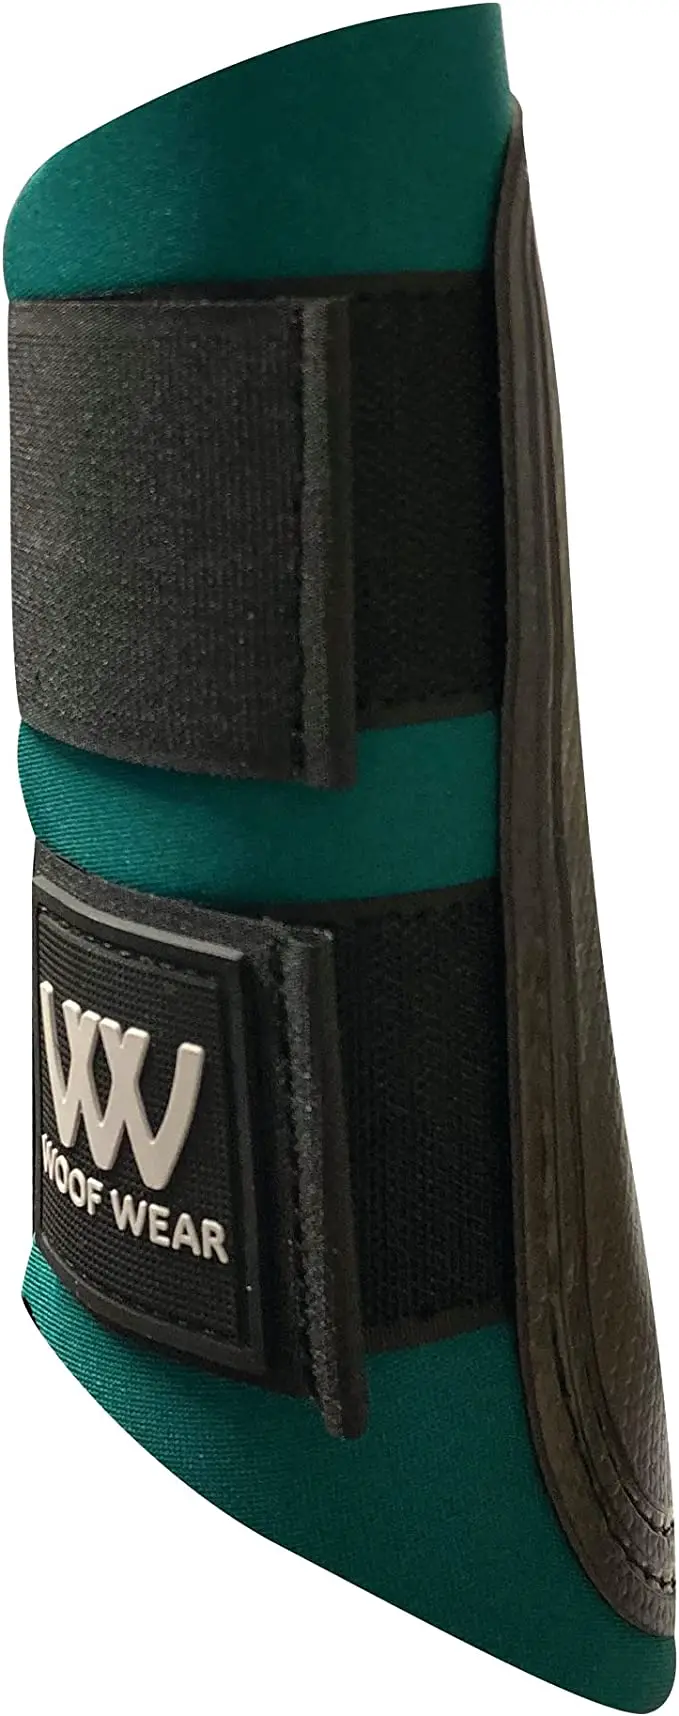 best brush boots for horses from woof wear